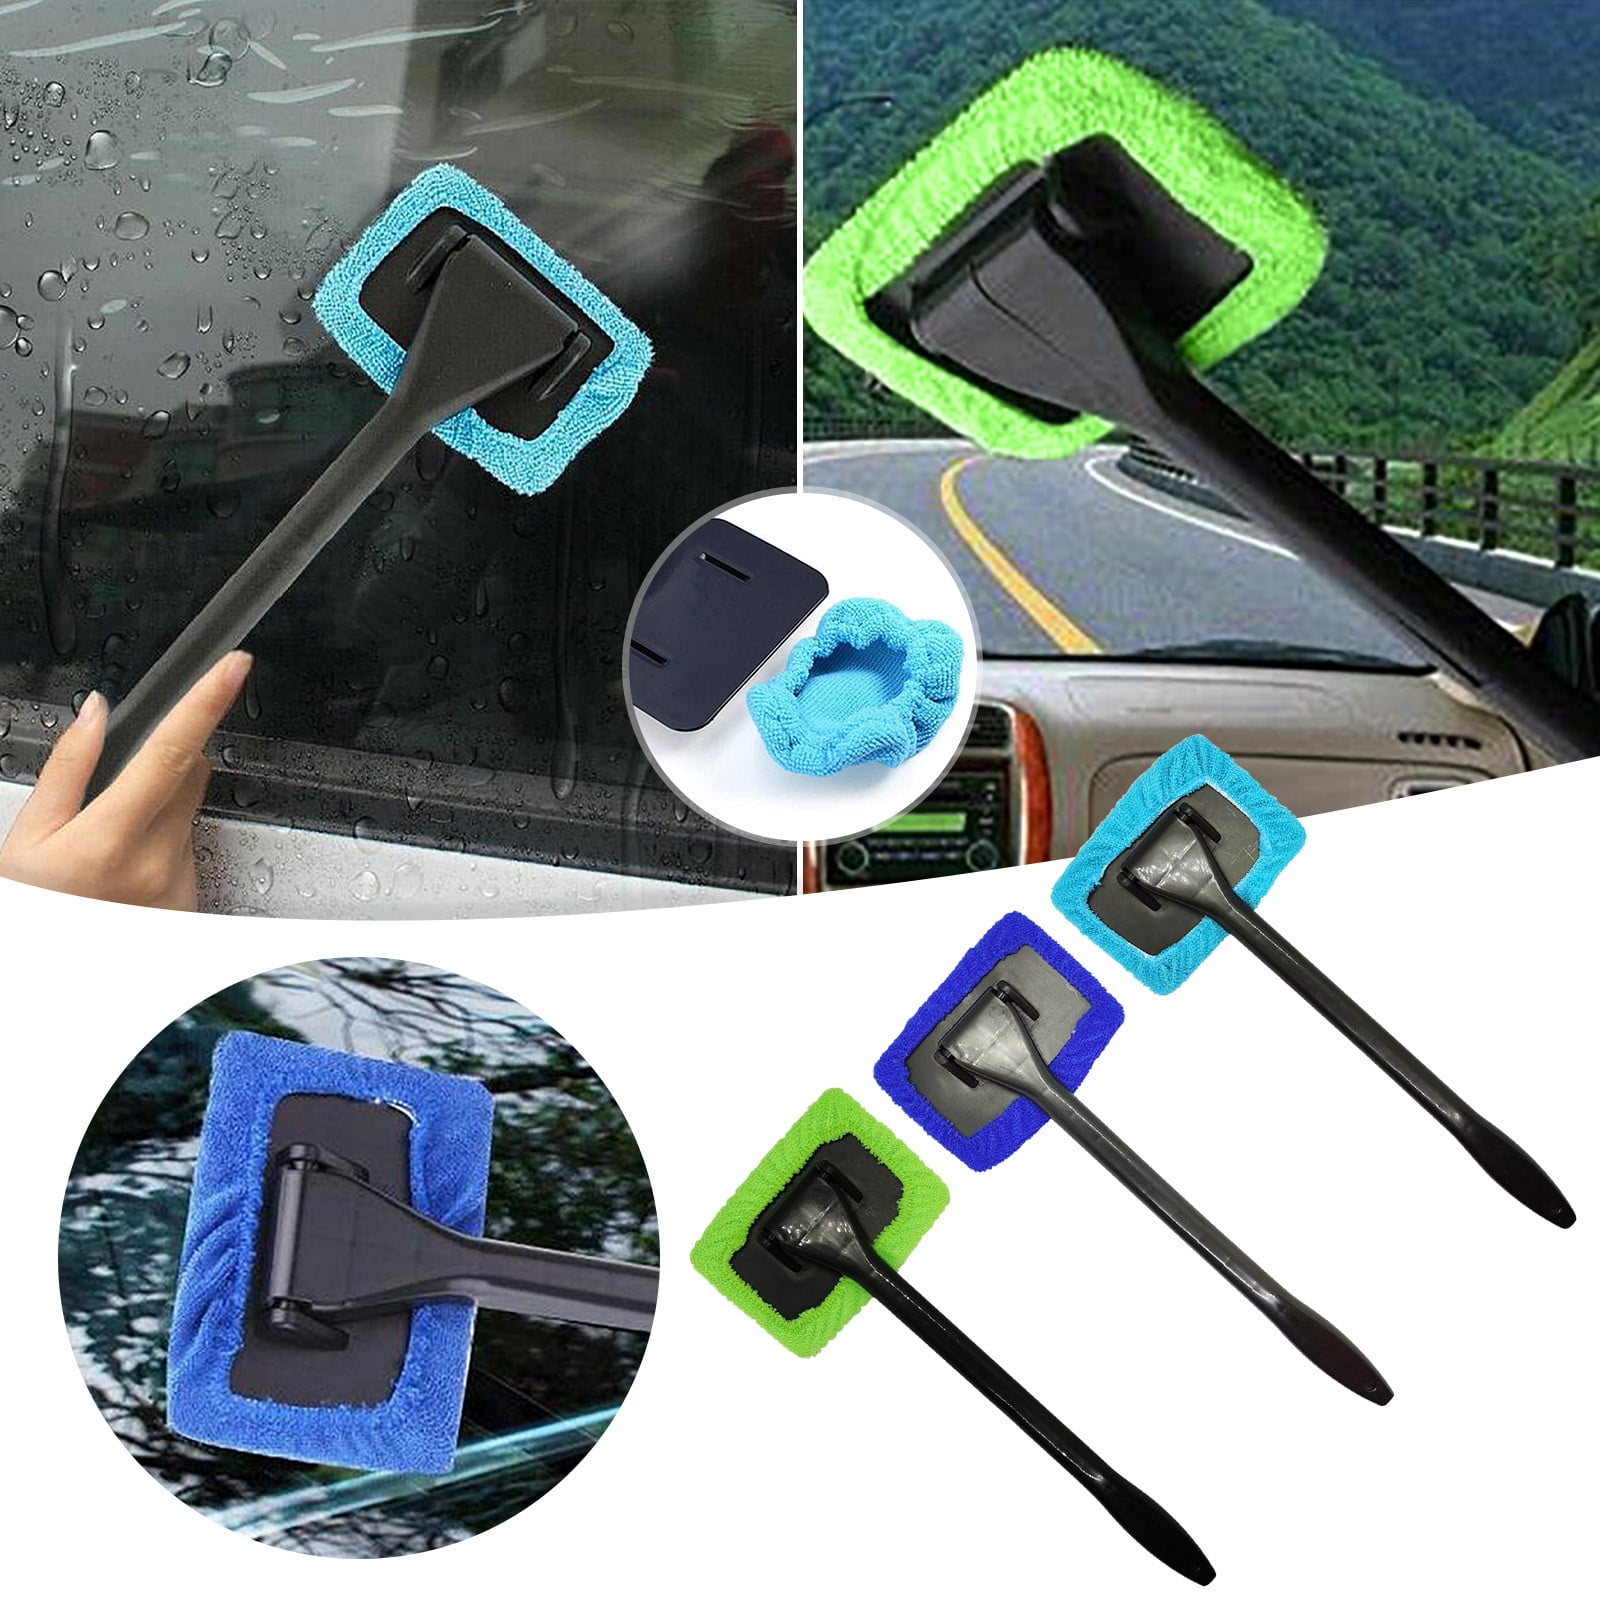 JOYFUL&HOPEFUL Windshield Cleaner Tool, Car Inside Window Cleaning Tool with Extendable Handle, with Premium Microfiber Pads and Chenille, Streaks